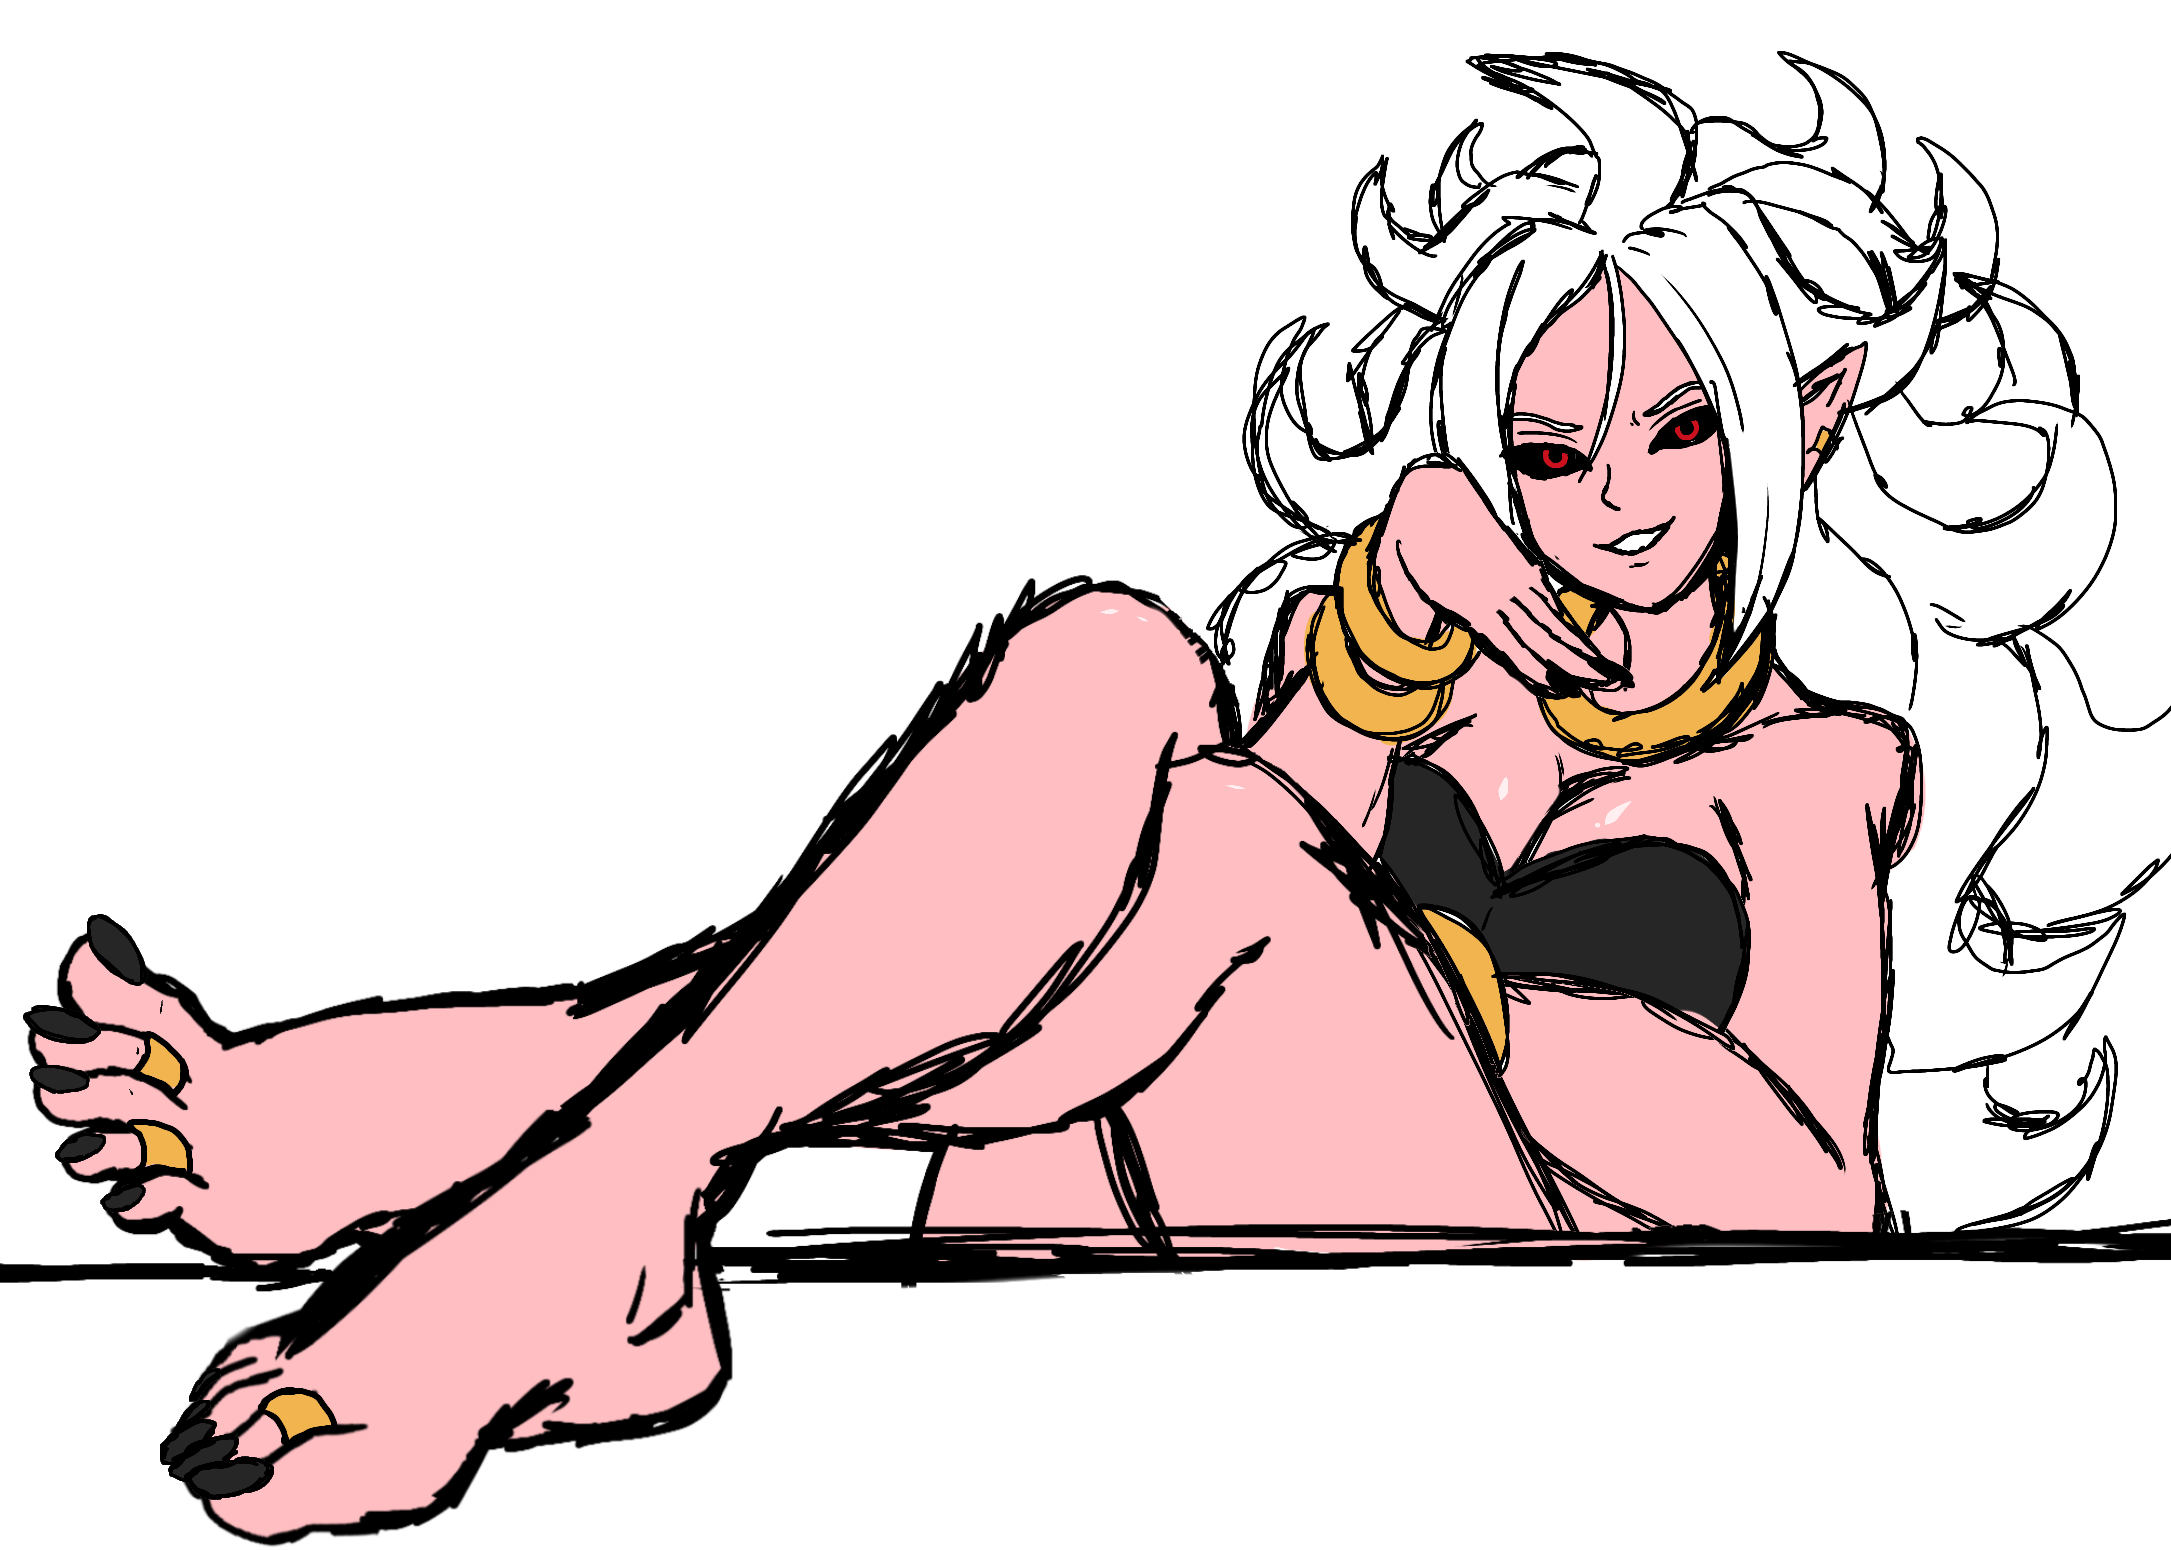 Android 21 legs out. 